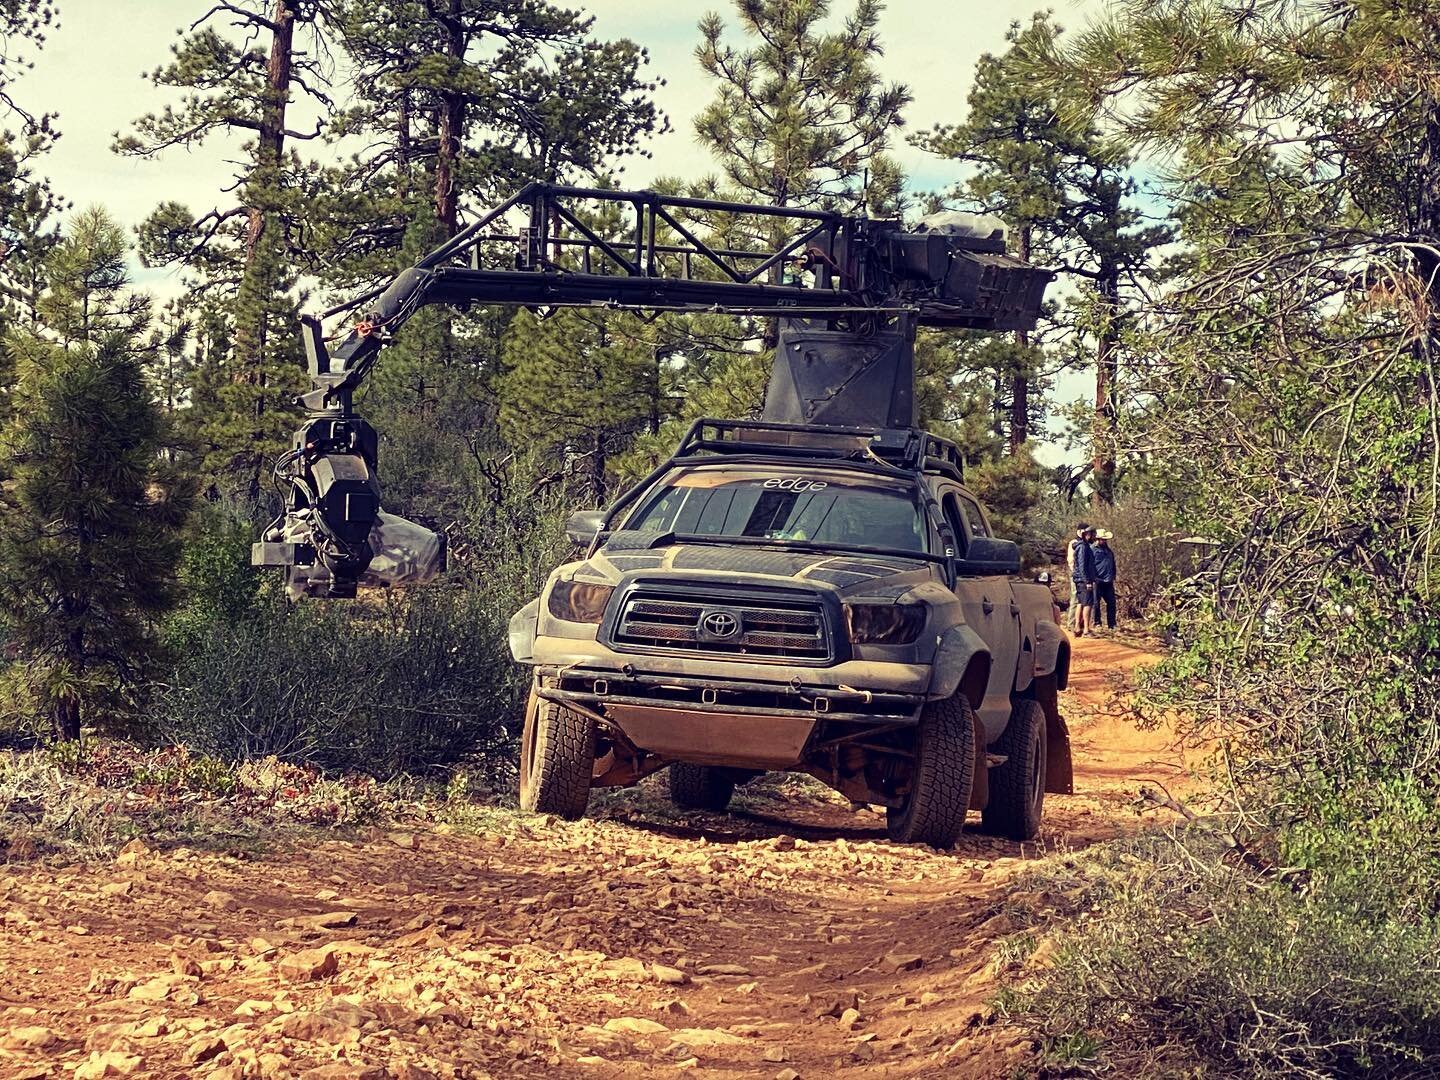 Summer is meant to be spent in the great outdoors!

#cameragear #cameraoperator #filmmaking #filmmakinglife #offroad #offroading #offroad4x4 #toyota #armcar #russianarm #cranecar #edgesystem #performancefilmworks #setlife #onlocation